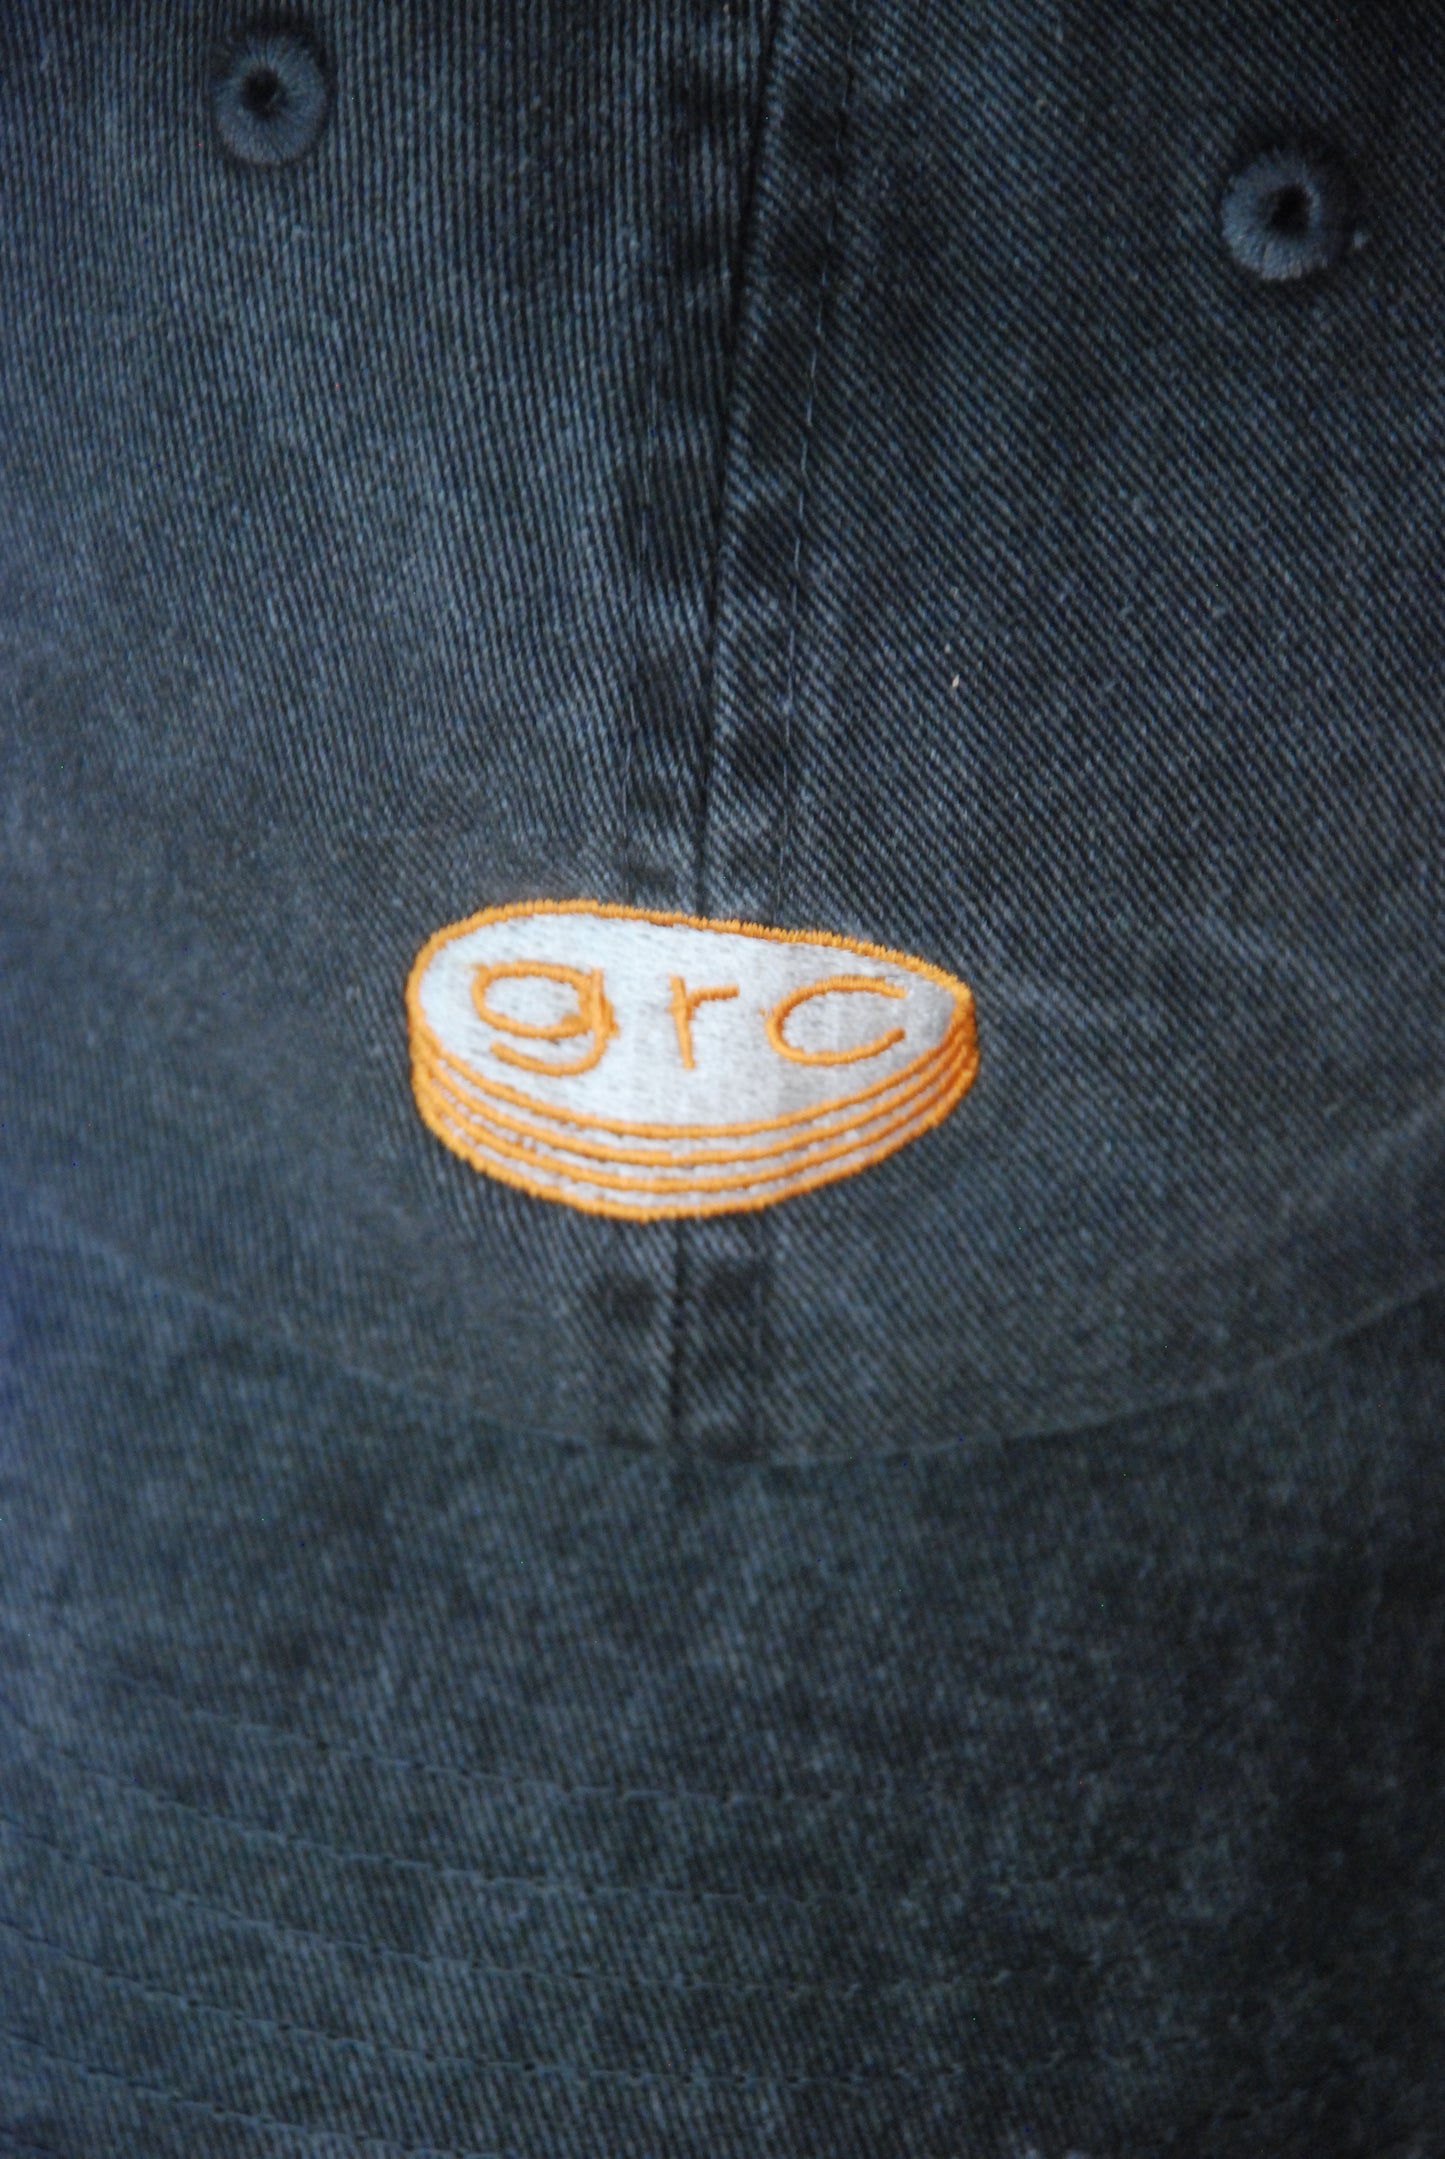 grc Embroidered Logo Baseball Low Cap Pigment Dyed